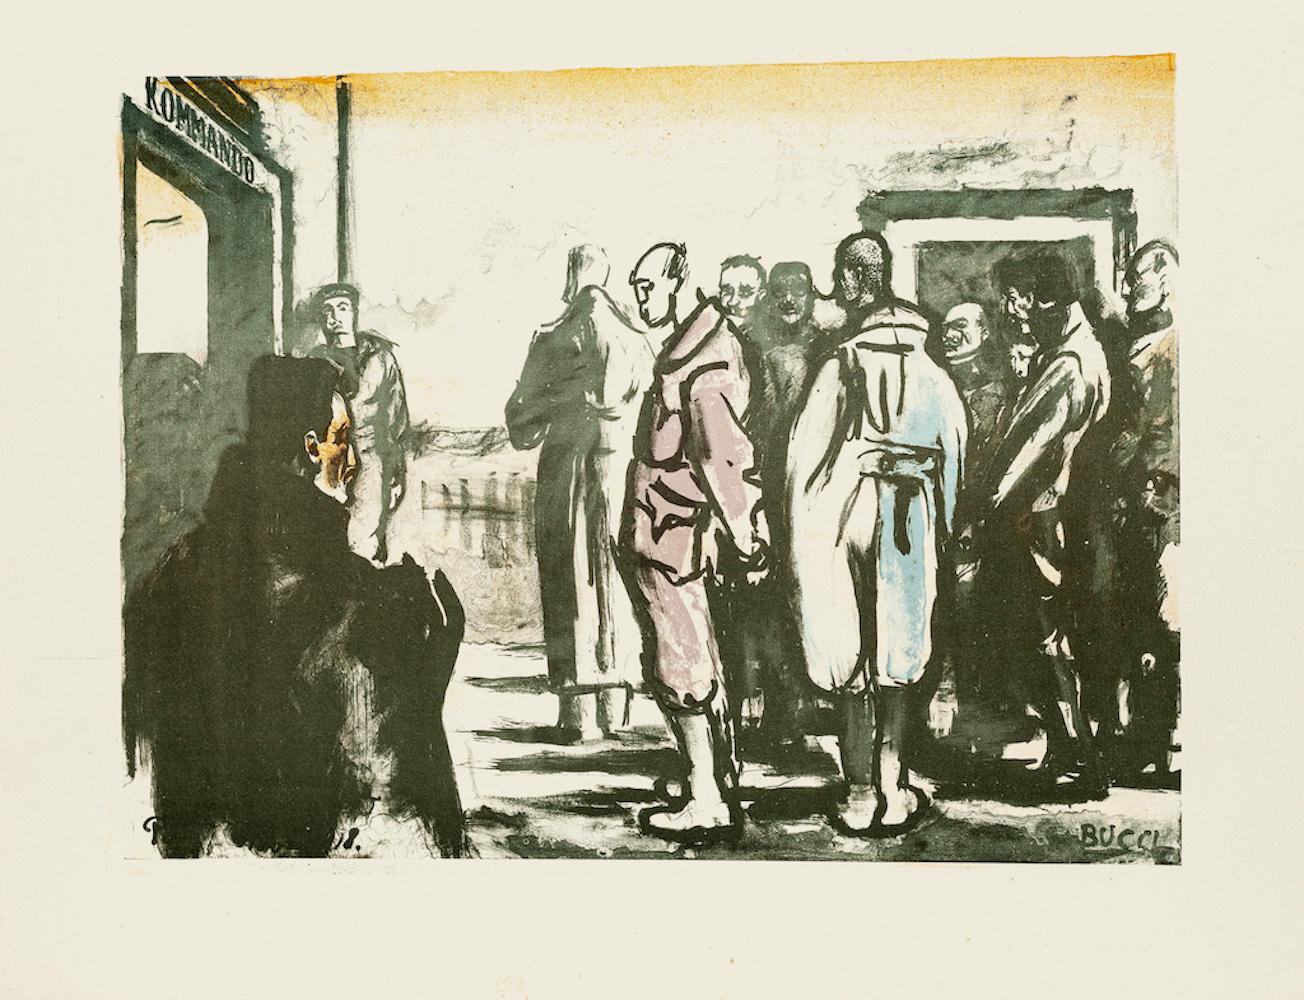 Group of Men - Original Lithograph by Anselmo Bucci - 1918